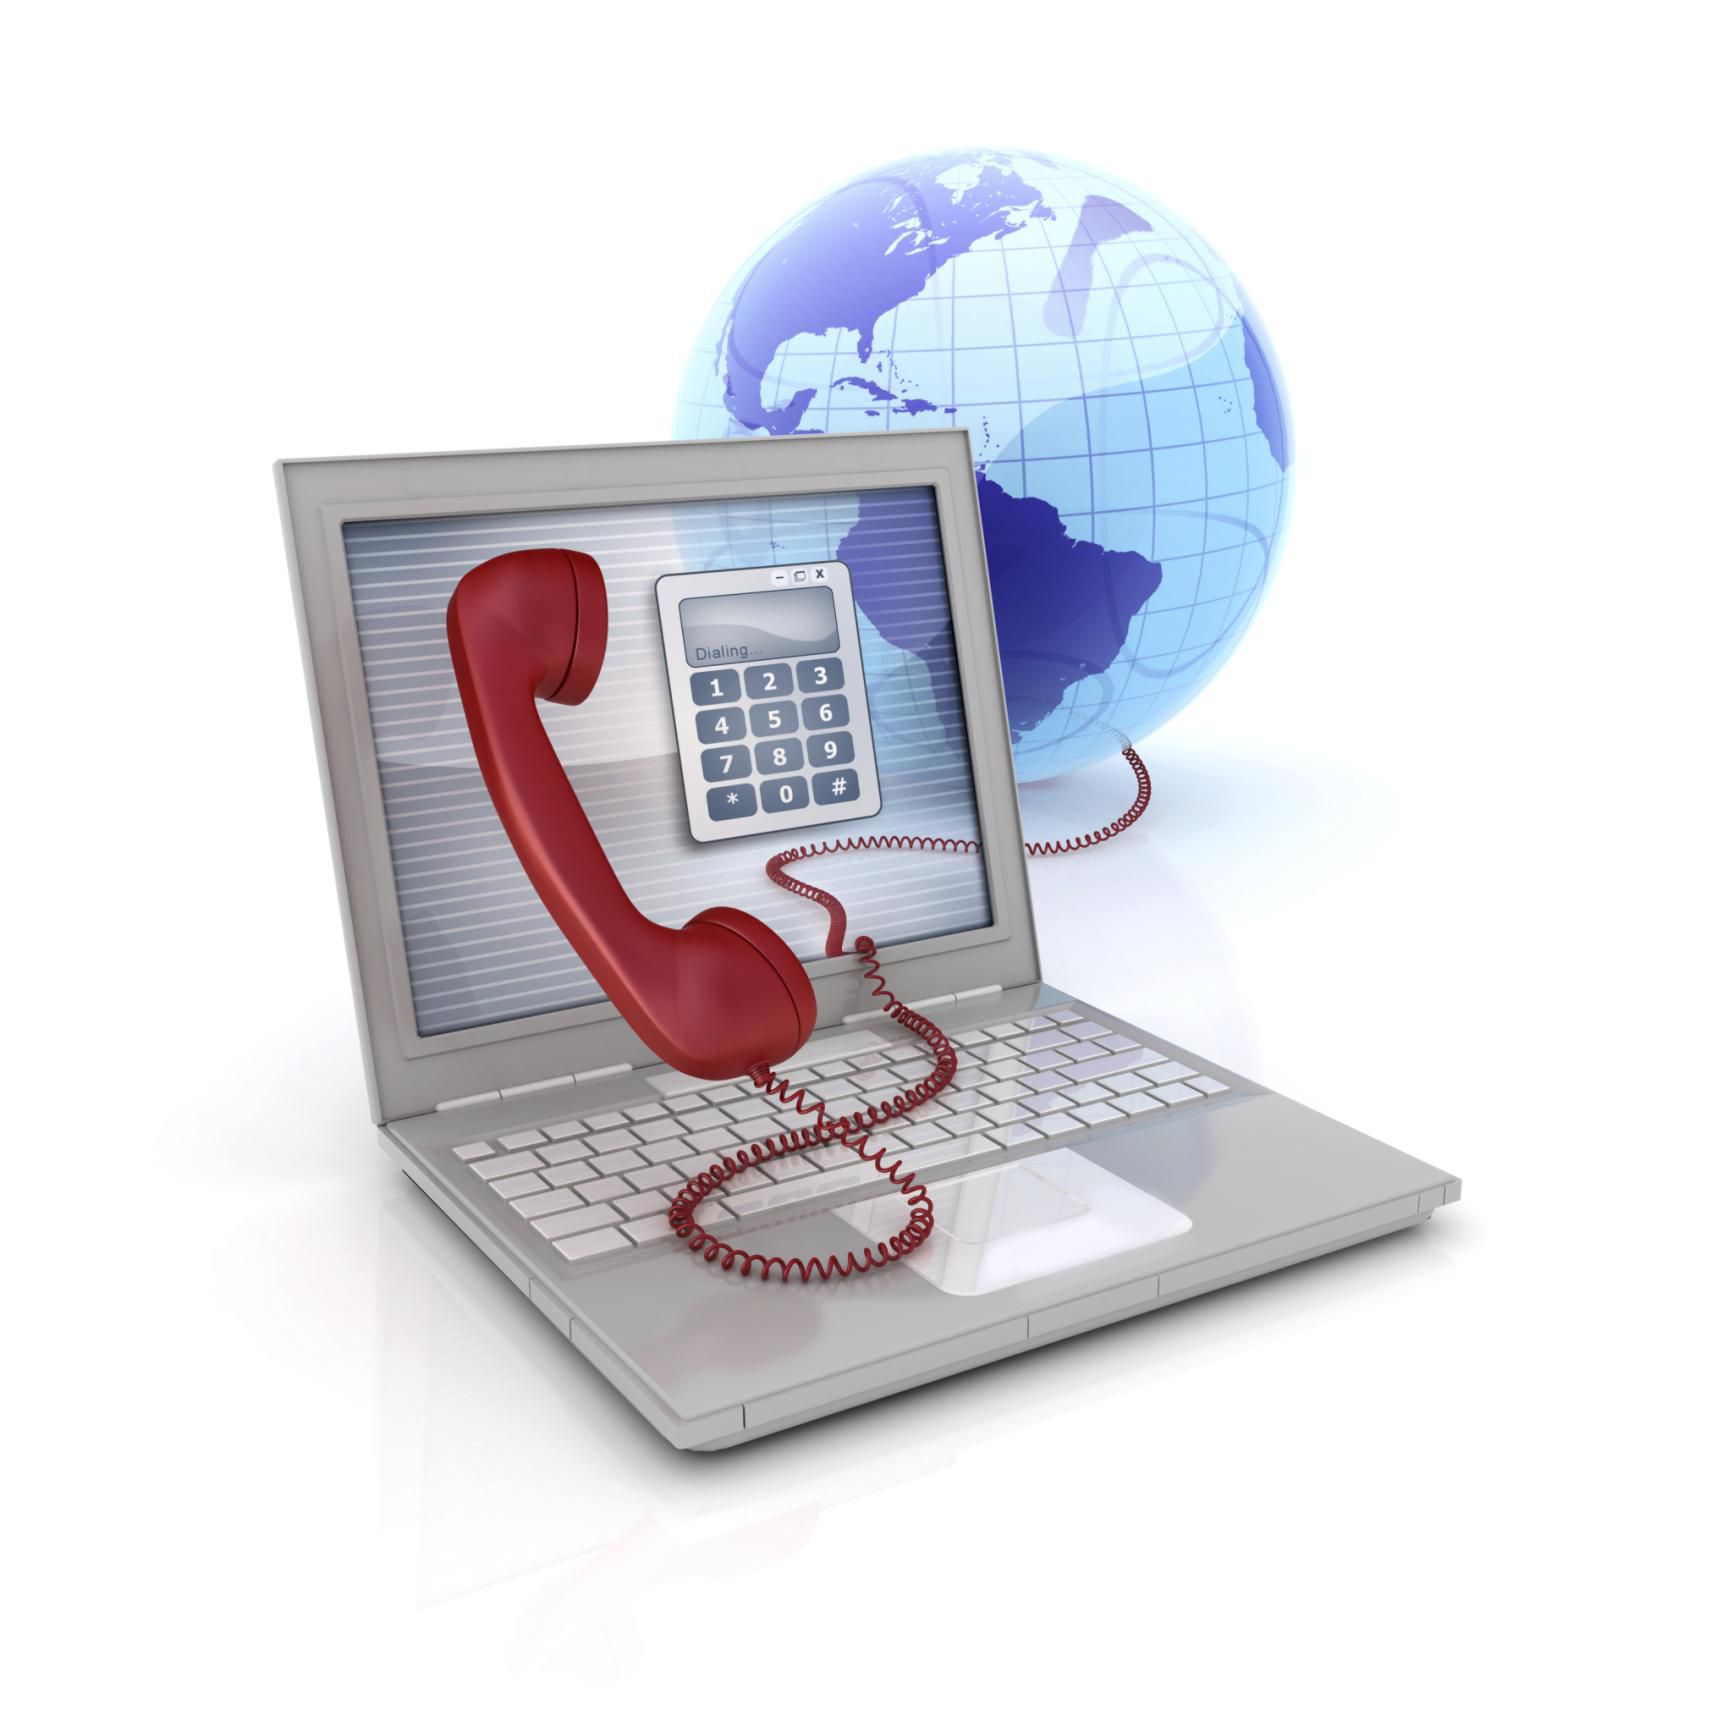 Can I Keep My Existing Phone Number While Using VoIP?